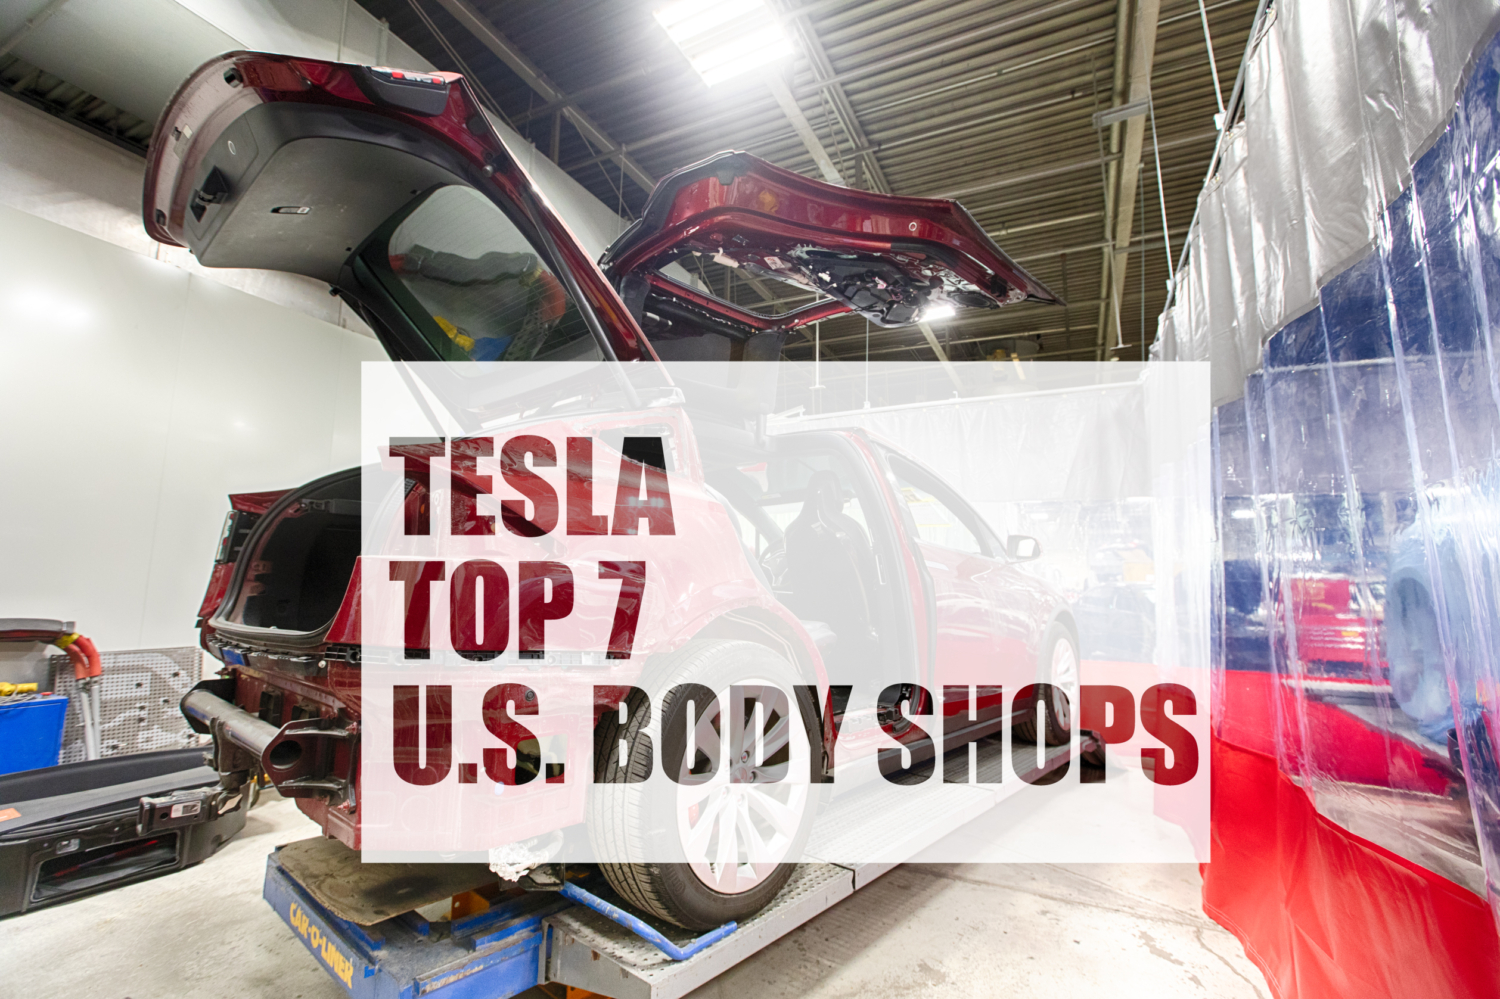 Tesla Certified Body Shop Malden MA | Today's Collision